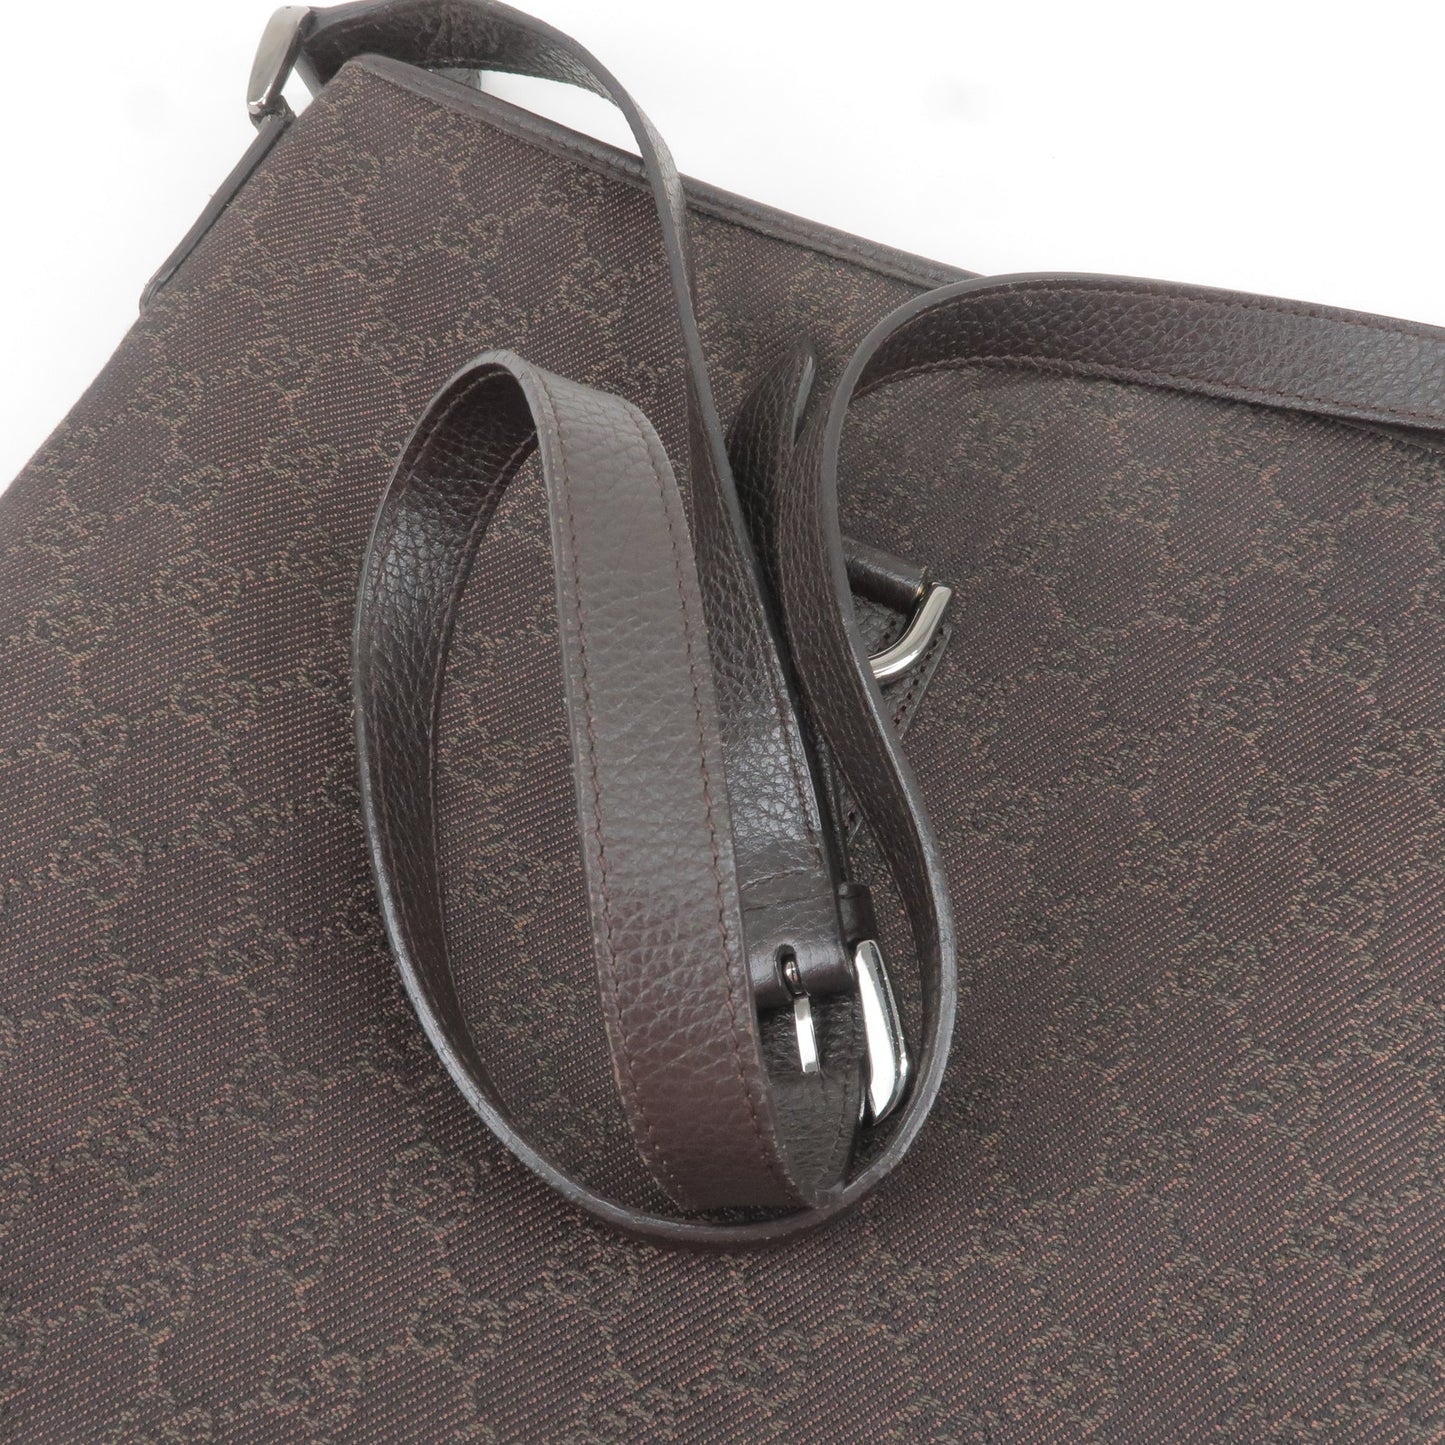 GUCCI Abbey GG Canvas Leather Shoulder Bag Brown 268642